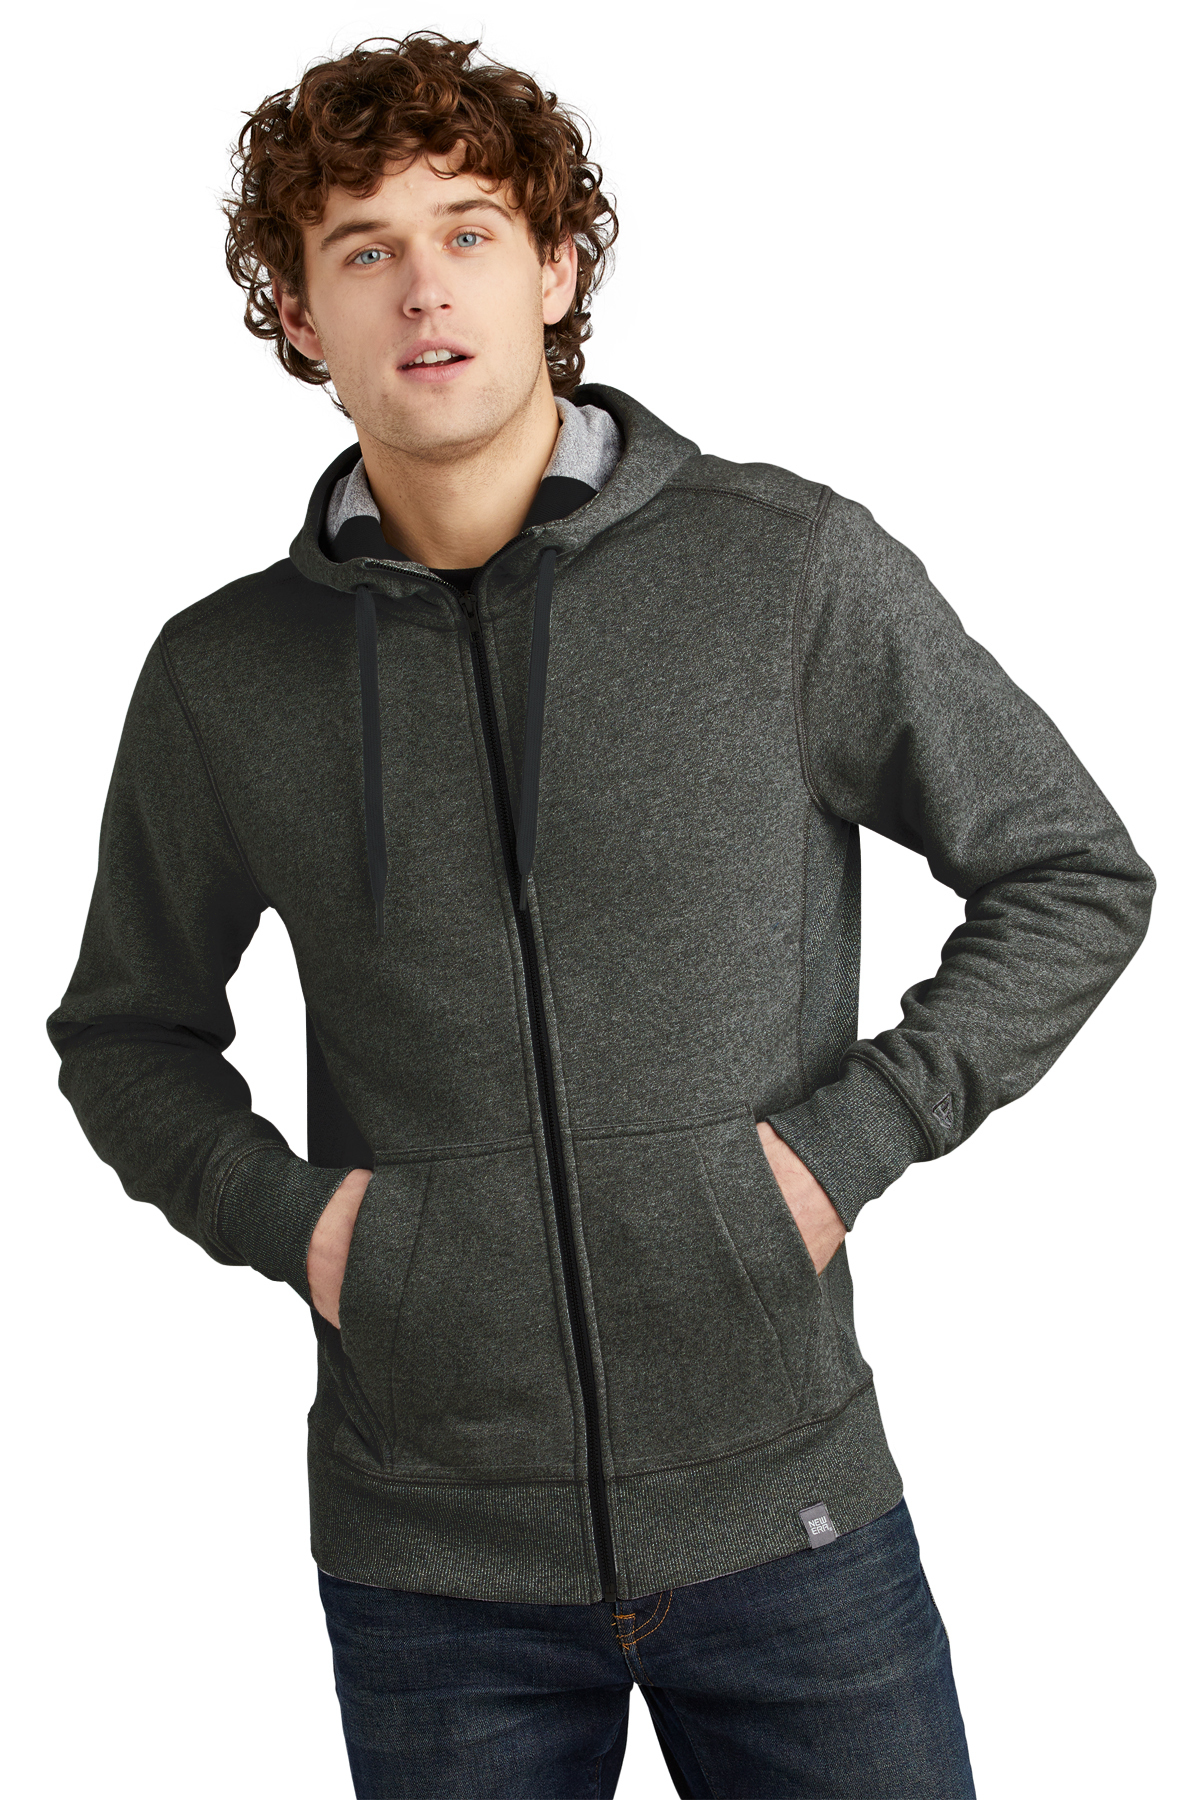 MEN'S BRUSHED FRENCH TERRY FULL ZIP HOODIE